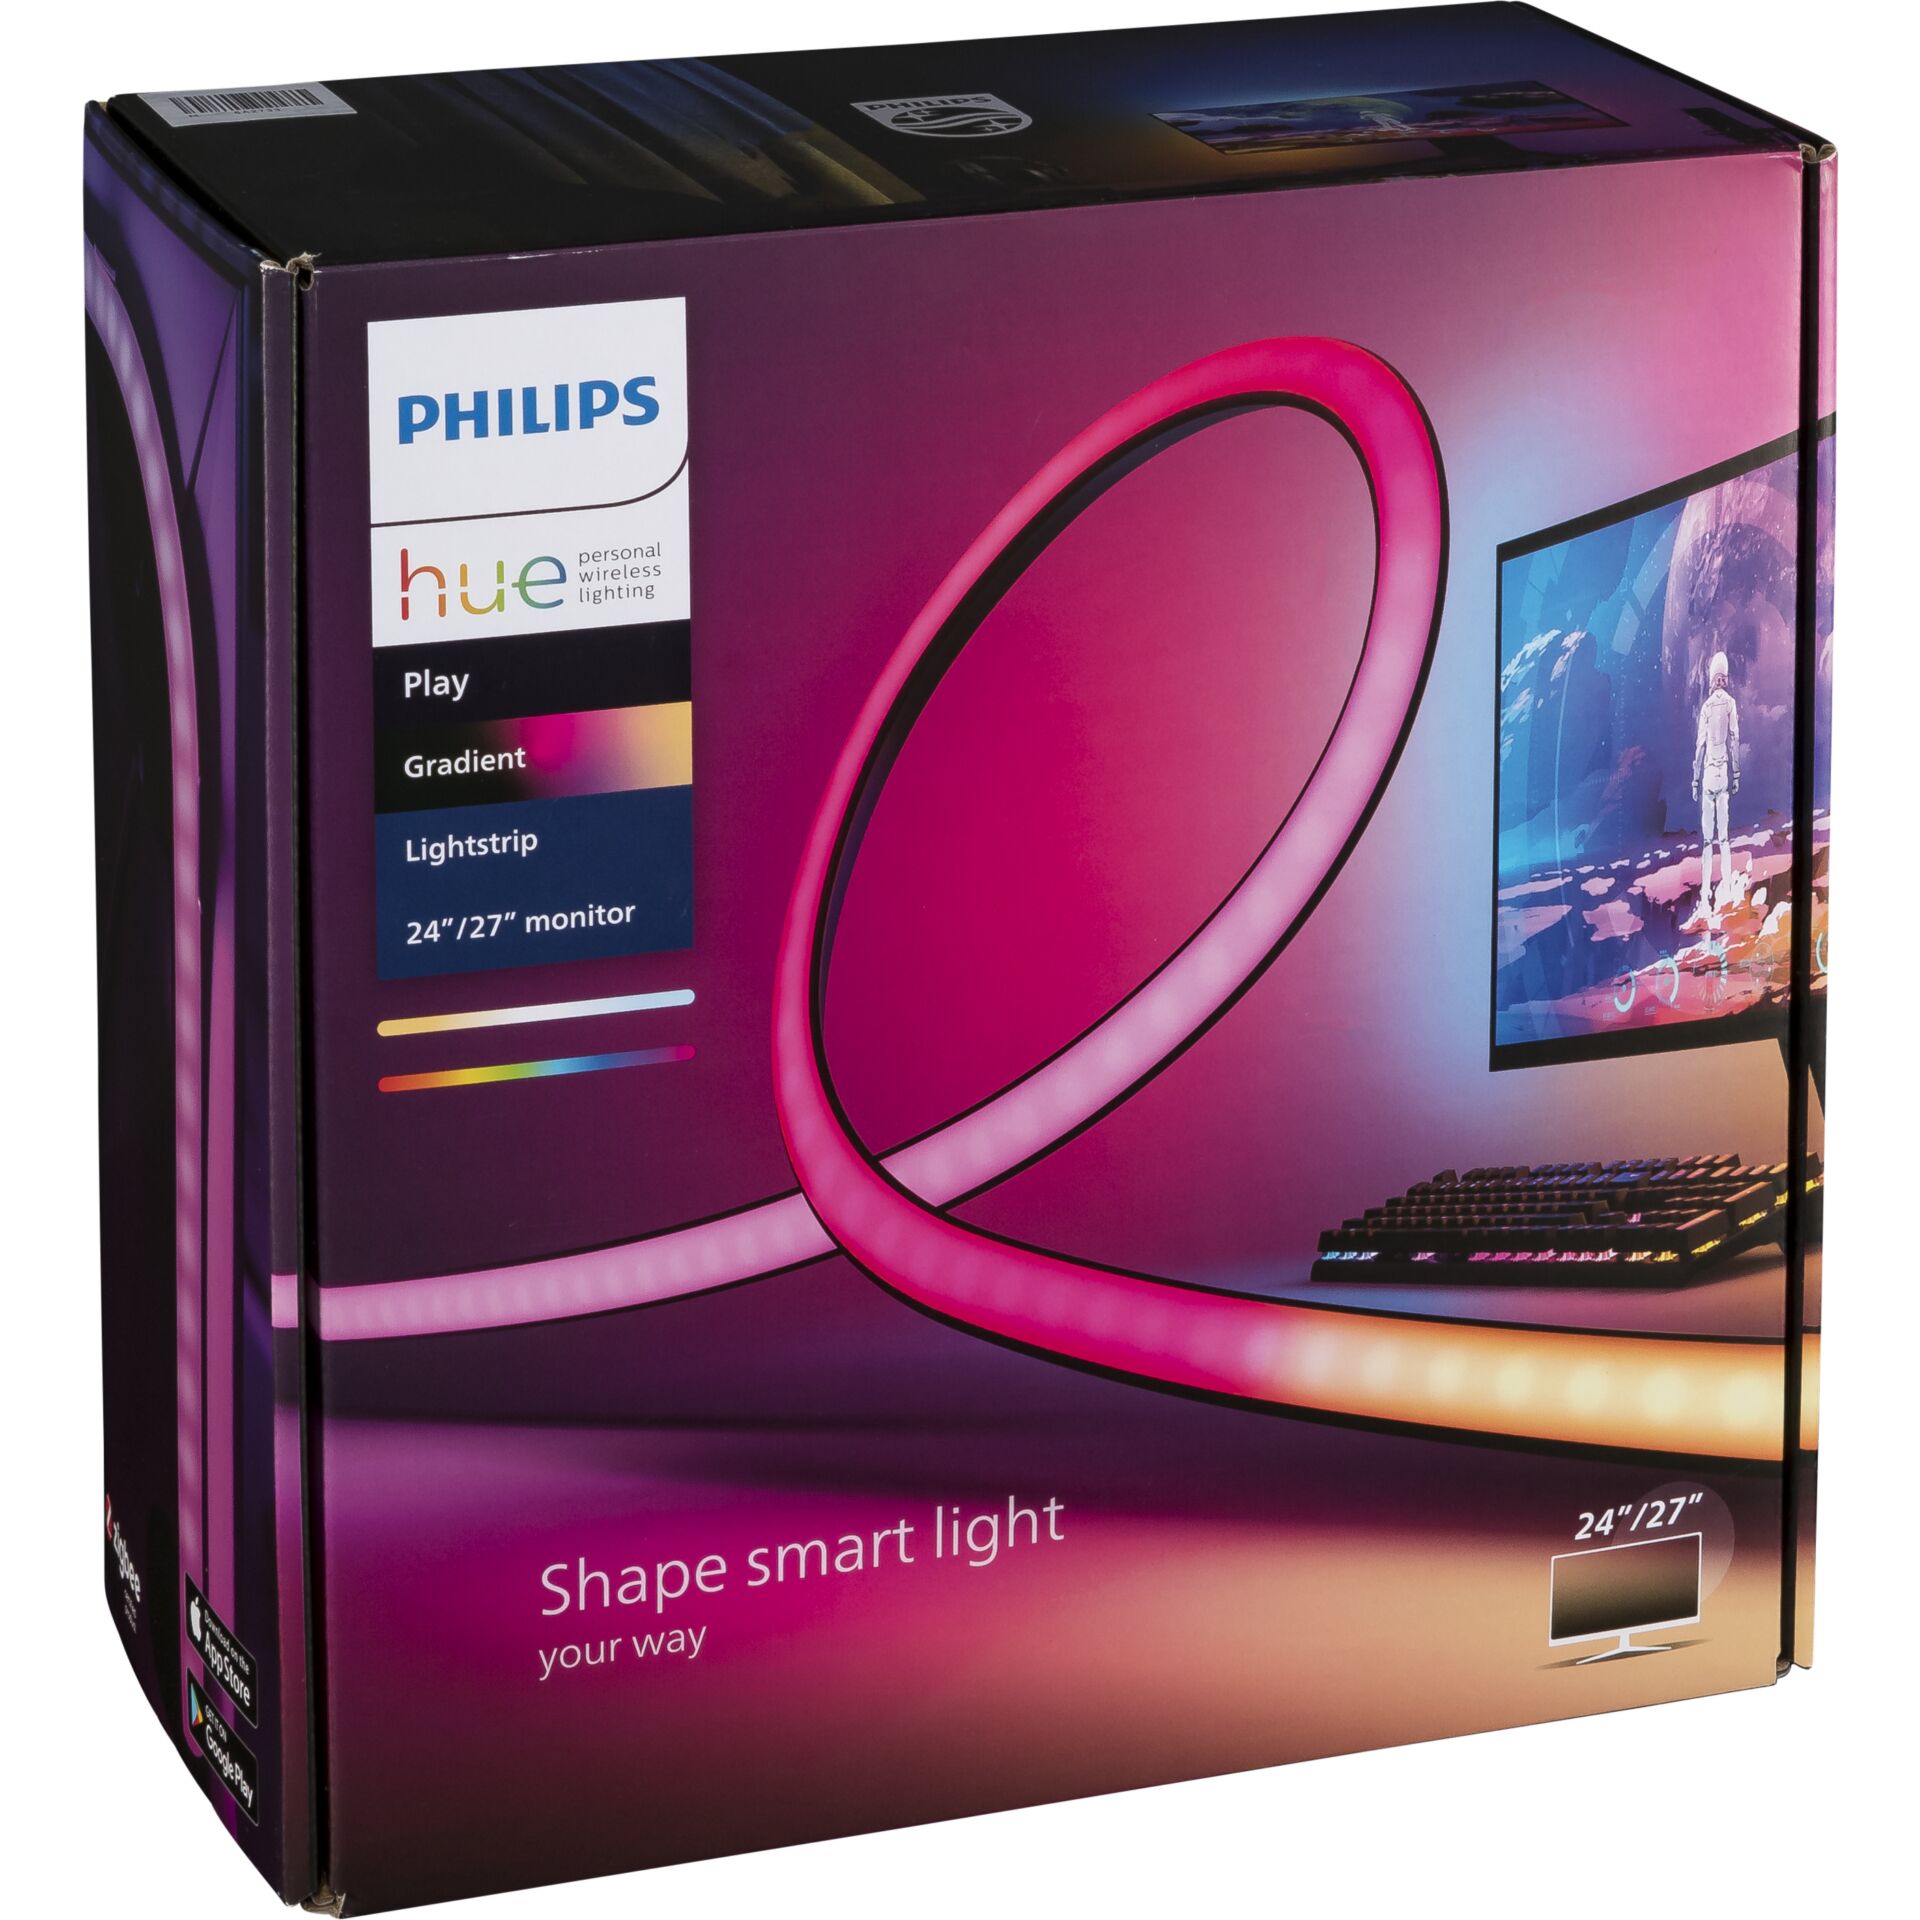 Philips Hue Play Gradient LED Lightstrip PC 24/27 Inch